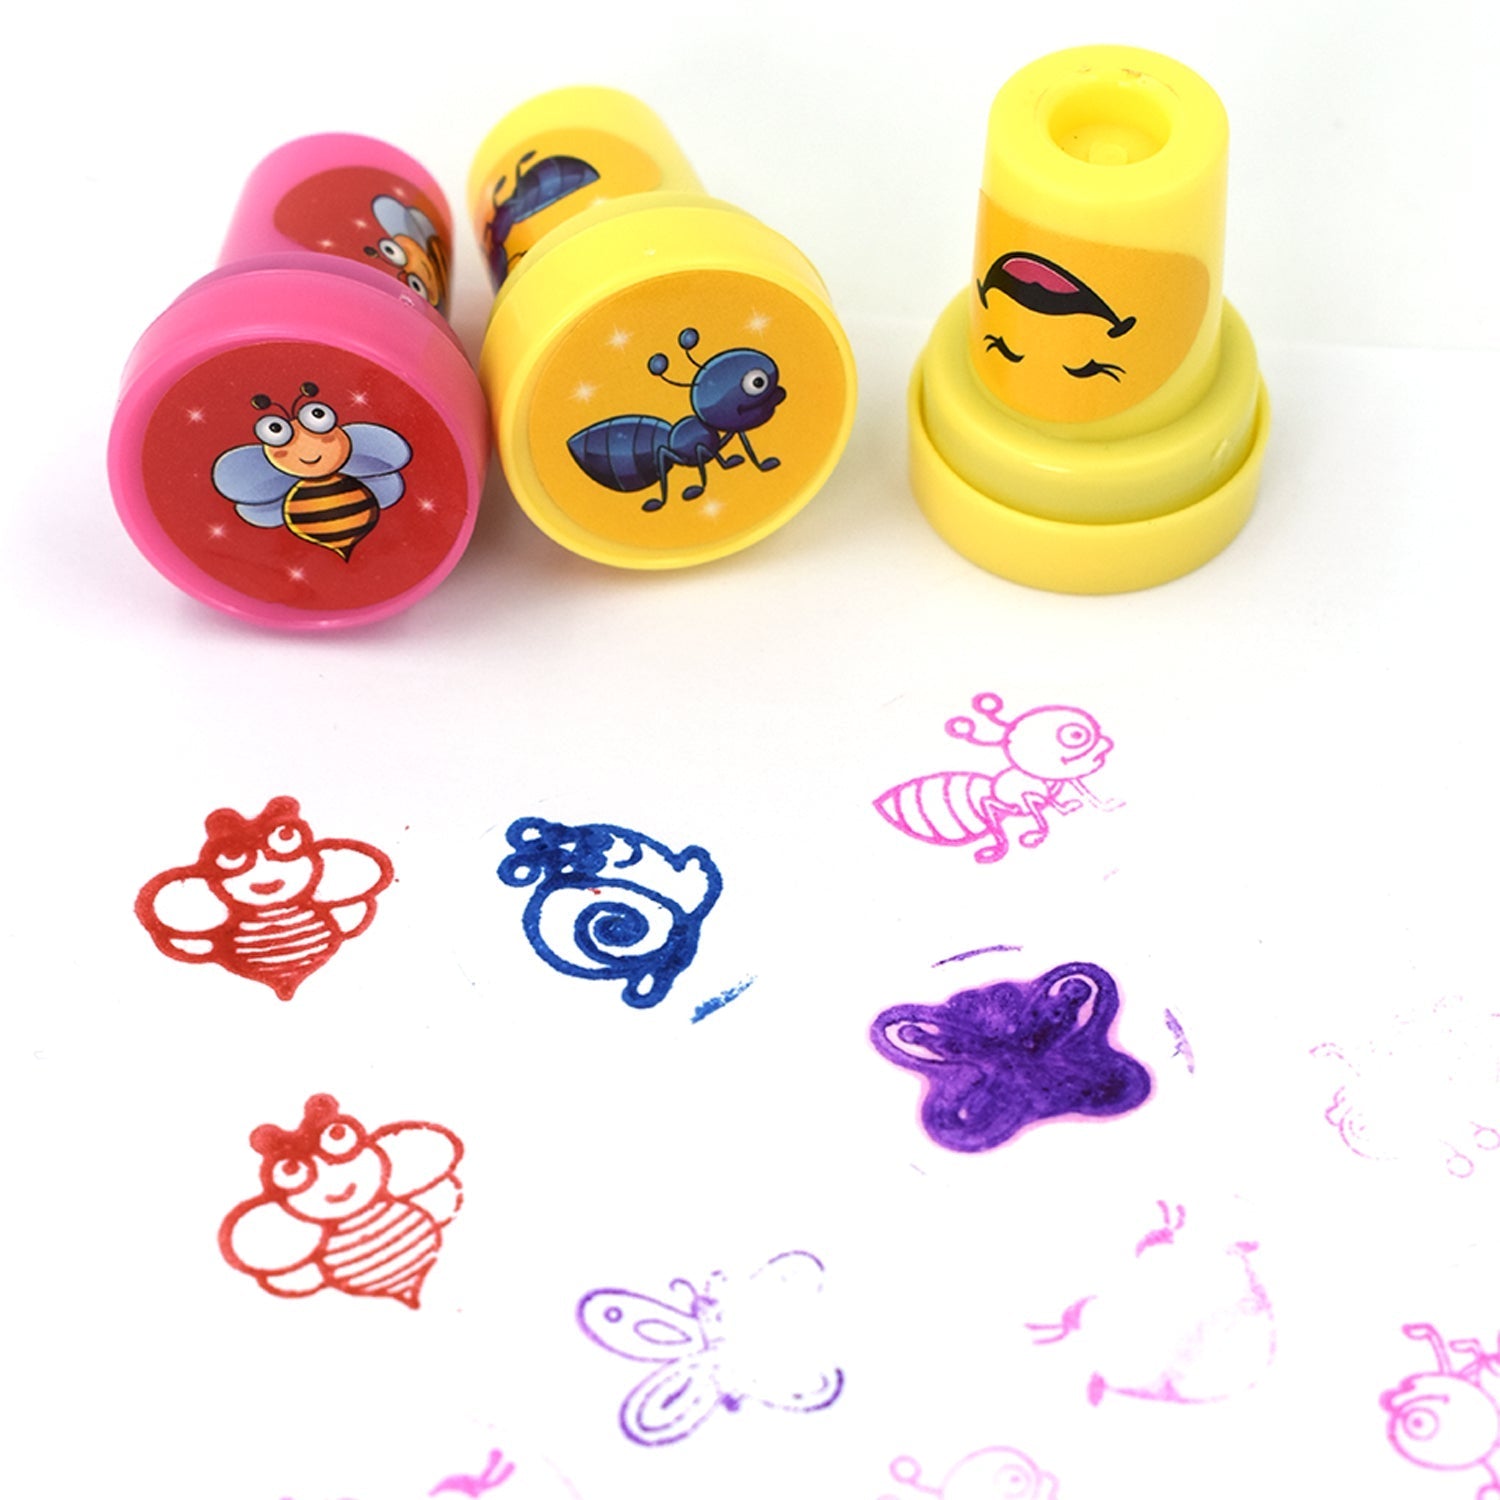 4805 12 Pc Stamp Set used in all types of household places by kids and children’s for playing purposes. DeoDap